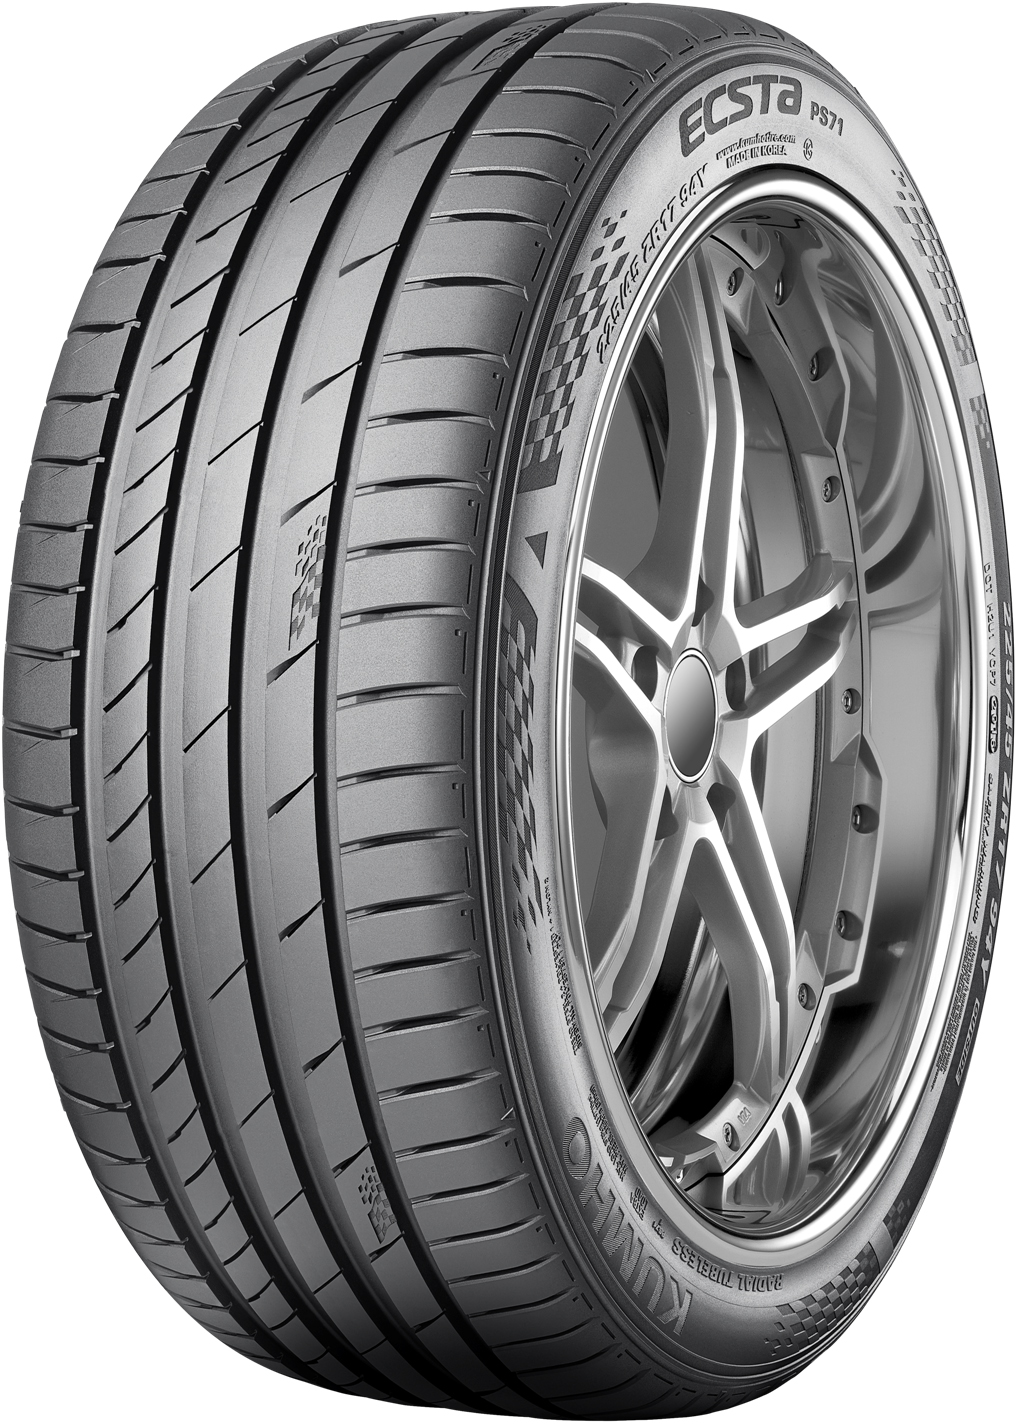 Anvelope auto KUMHO PS71 XL XL 255/45 R20 150Y